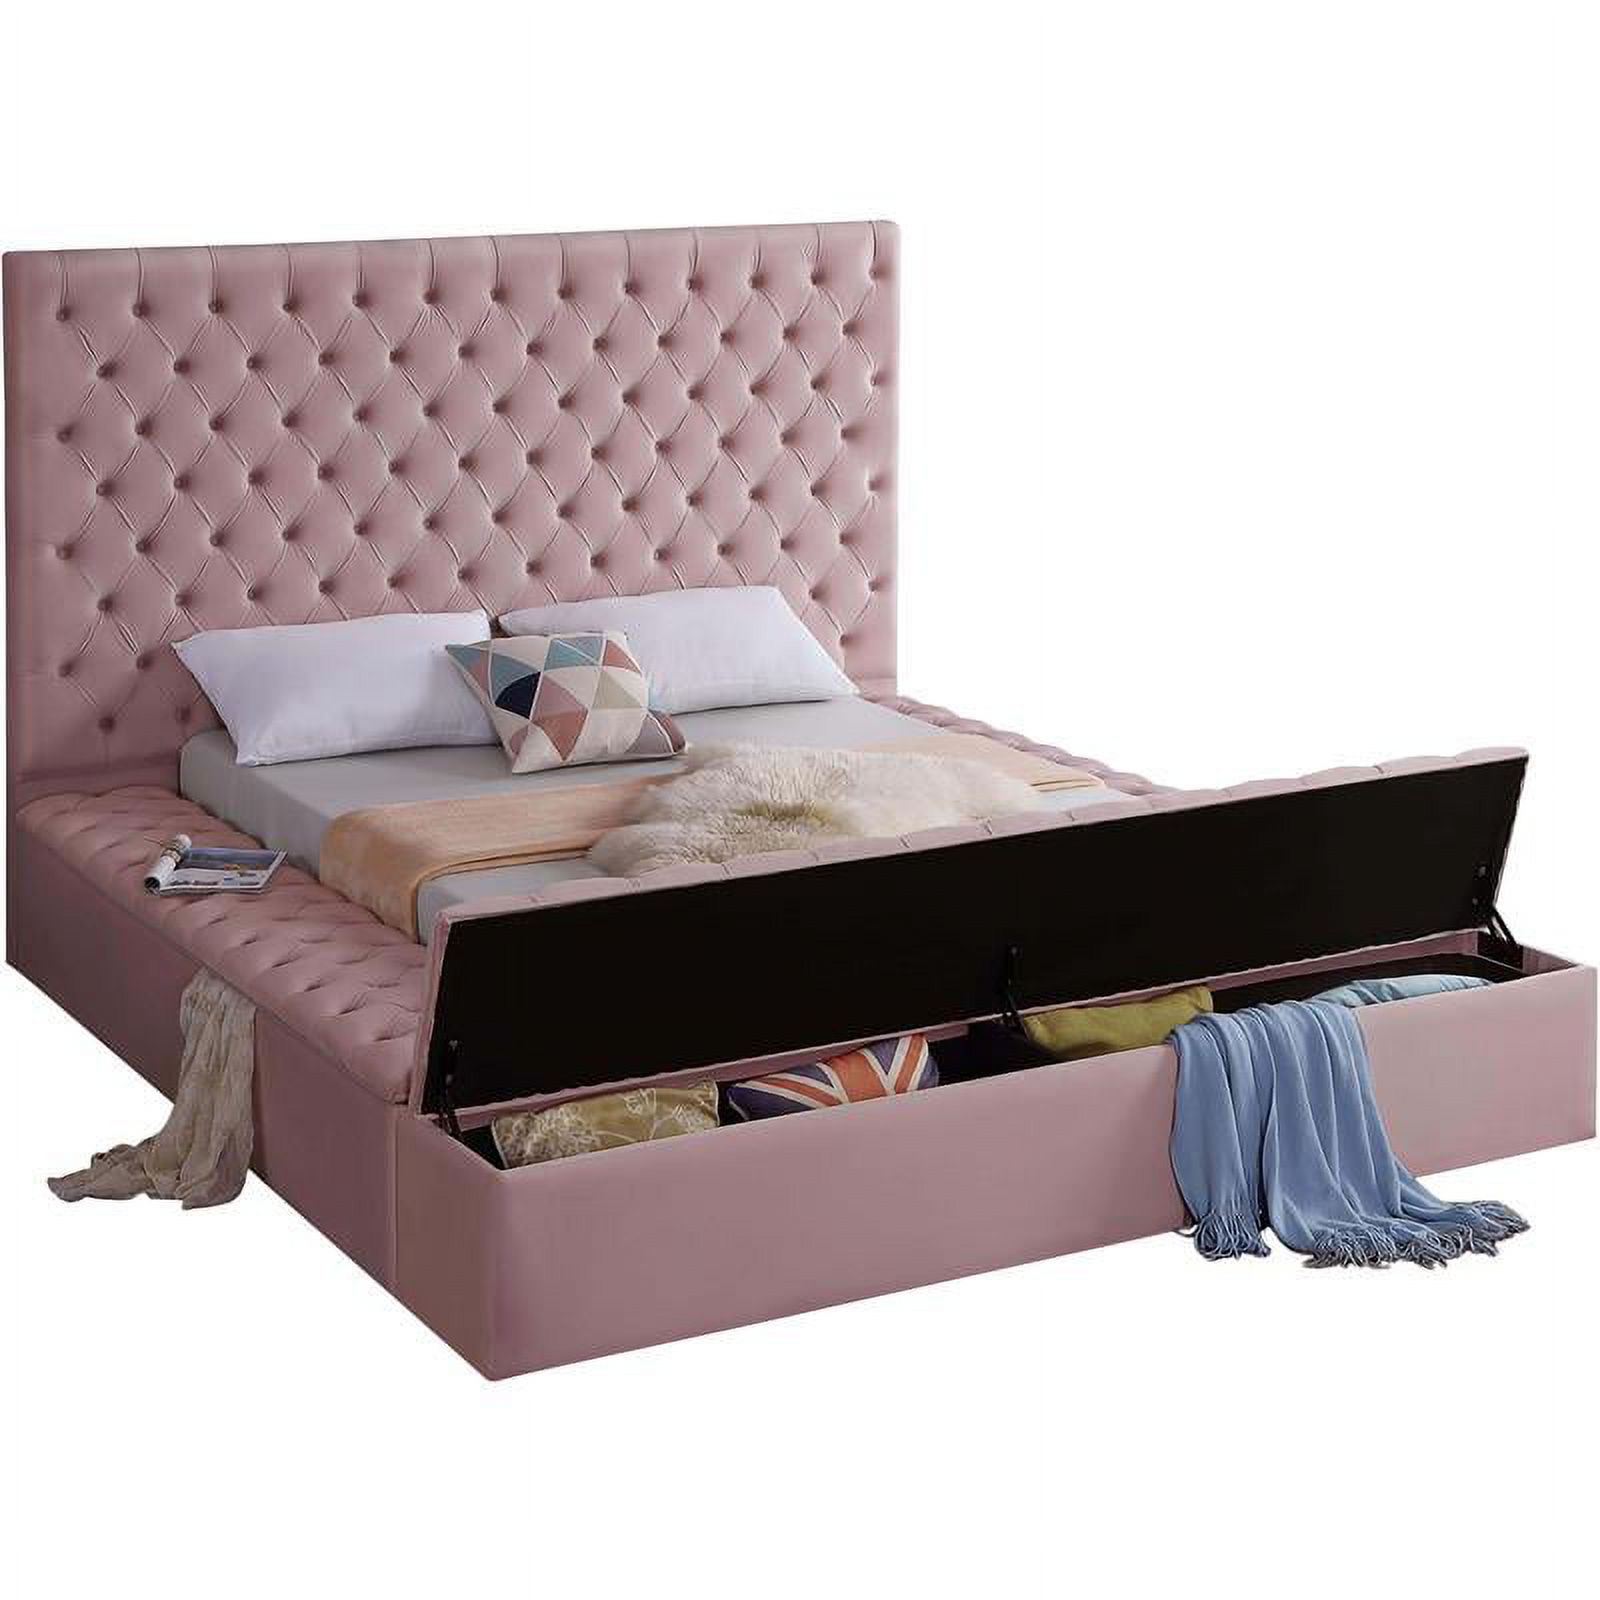 Meridian Furniture Bliss Solid Wood Tufted Velvet King Bed in Pink - image 2 of 6